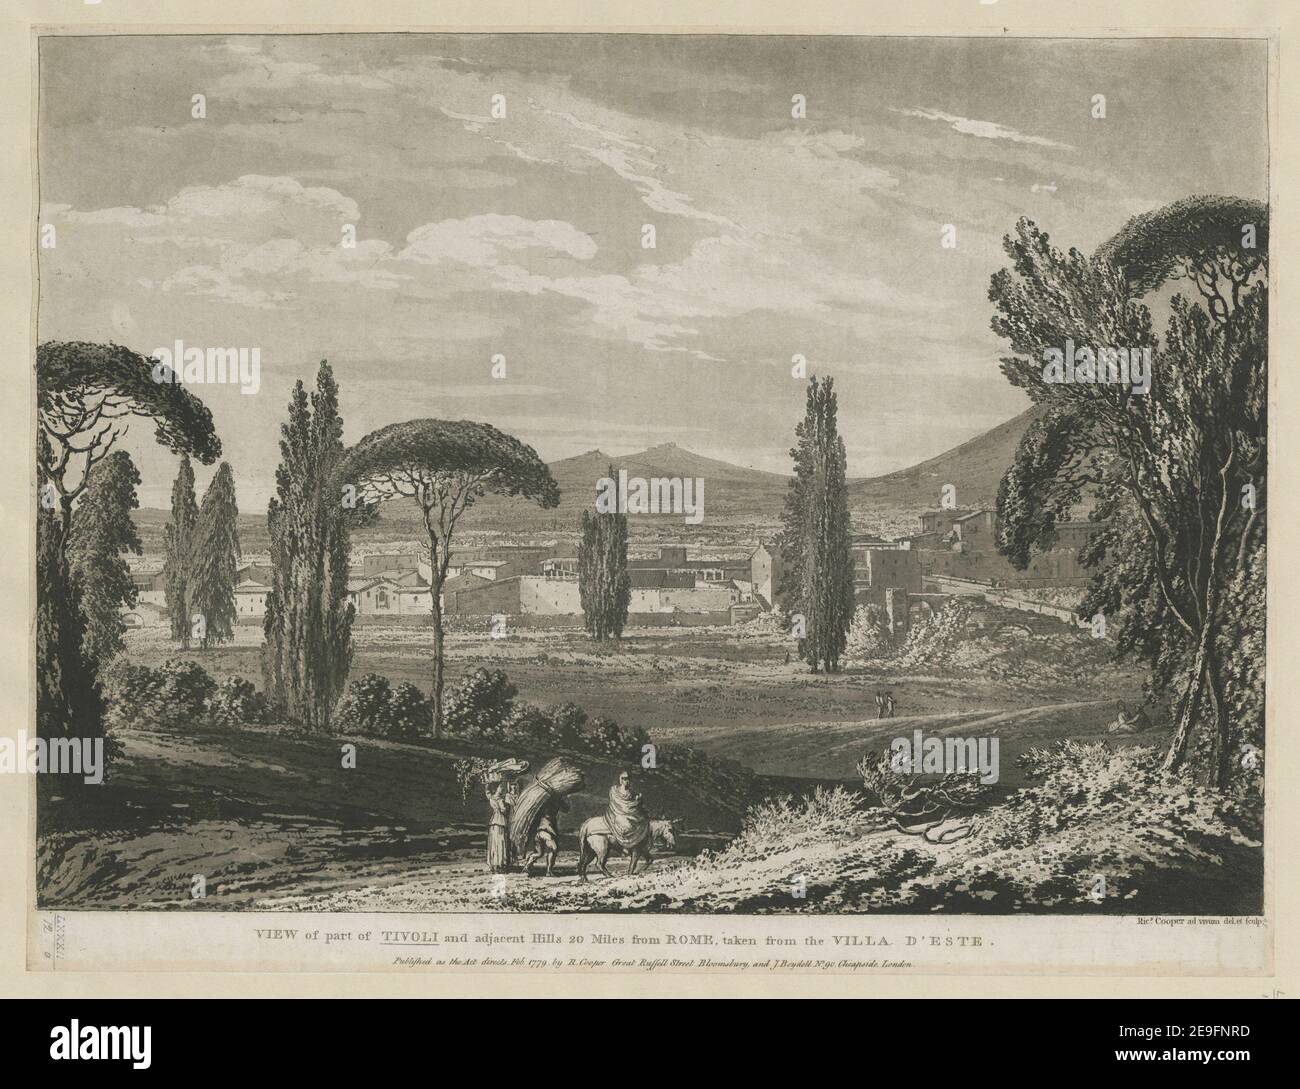 VIEW of part of TIVOLI and adjacent Hills 20 Miles from ROME. taken from the VILLA D'ESTE.  Author  Cooper, Richard 82.12.o. Place of publication: [London] Publisher: Published as the Act directs Feb. 1779 by R. Cooper Great Russell Street Bloomsbury, and J. Boydell No, 90 Cheapside London. Date of publication: [1779]  Item type: 1 print Medium: sepia aquatint Dimensions: sheet 39.2 x 51.5 cm (trimmed below platemark)  Former owner: George III, King of Great Britain, 1738-1820 Stock Photo